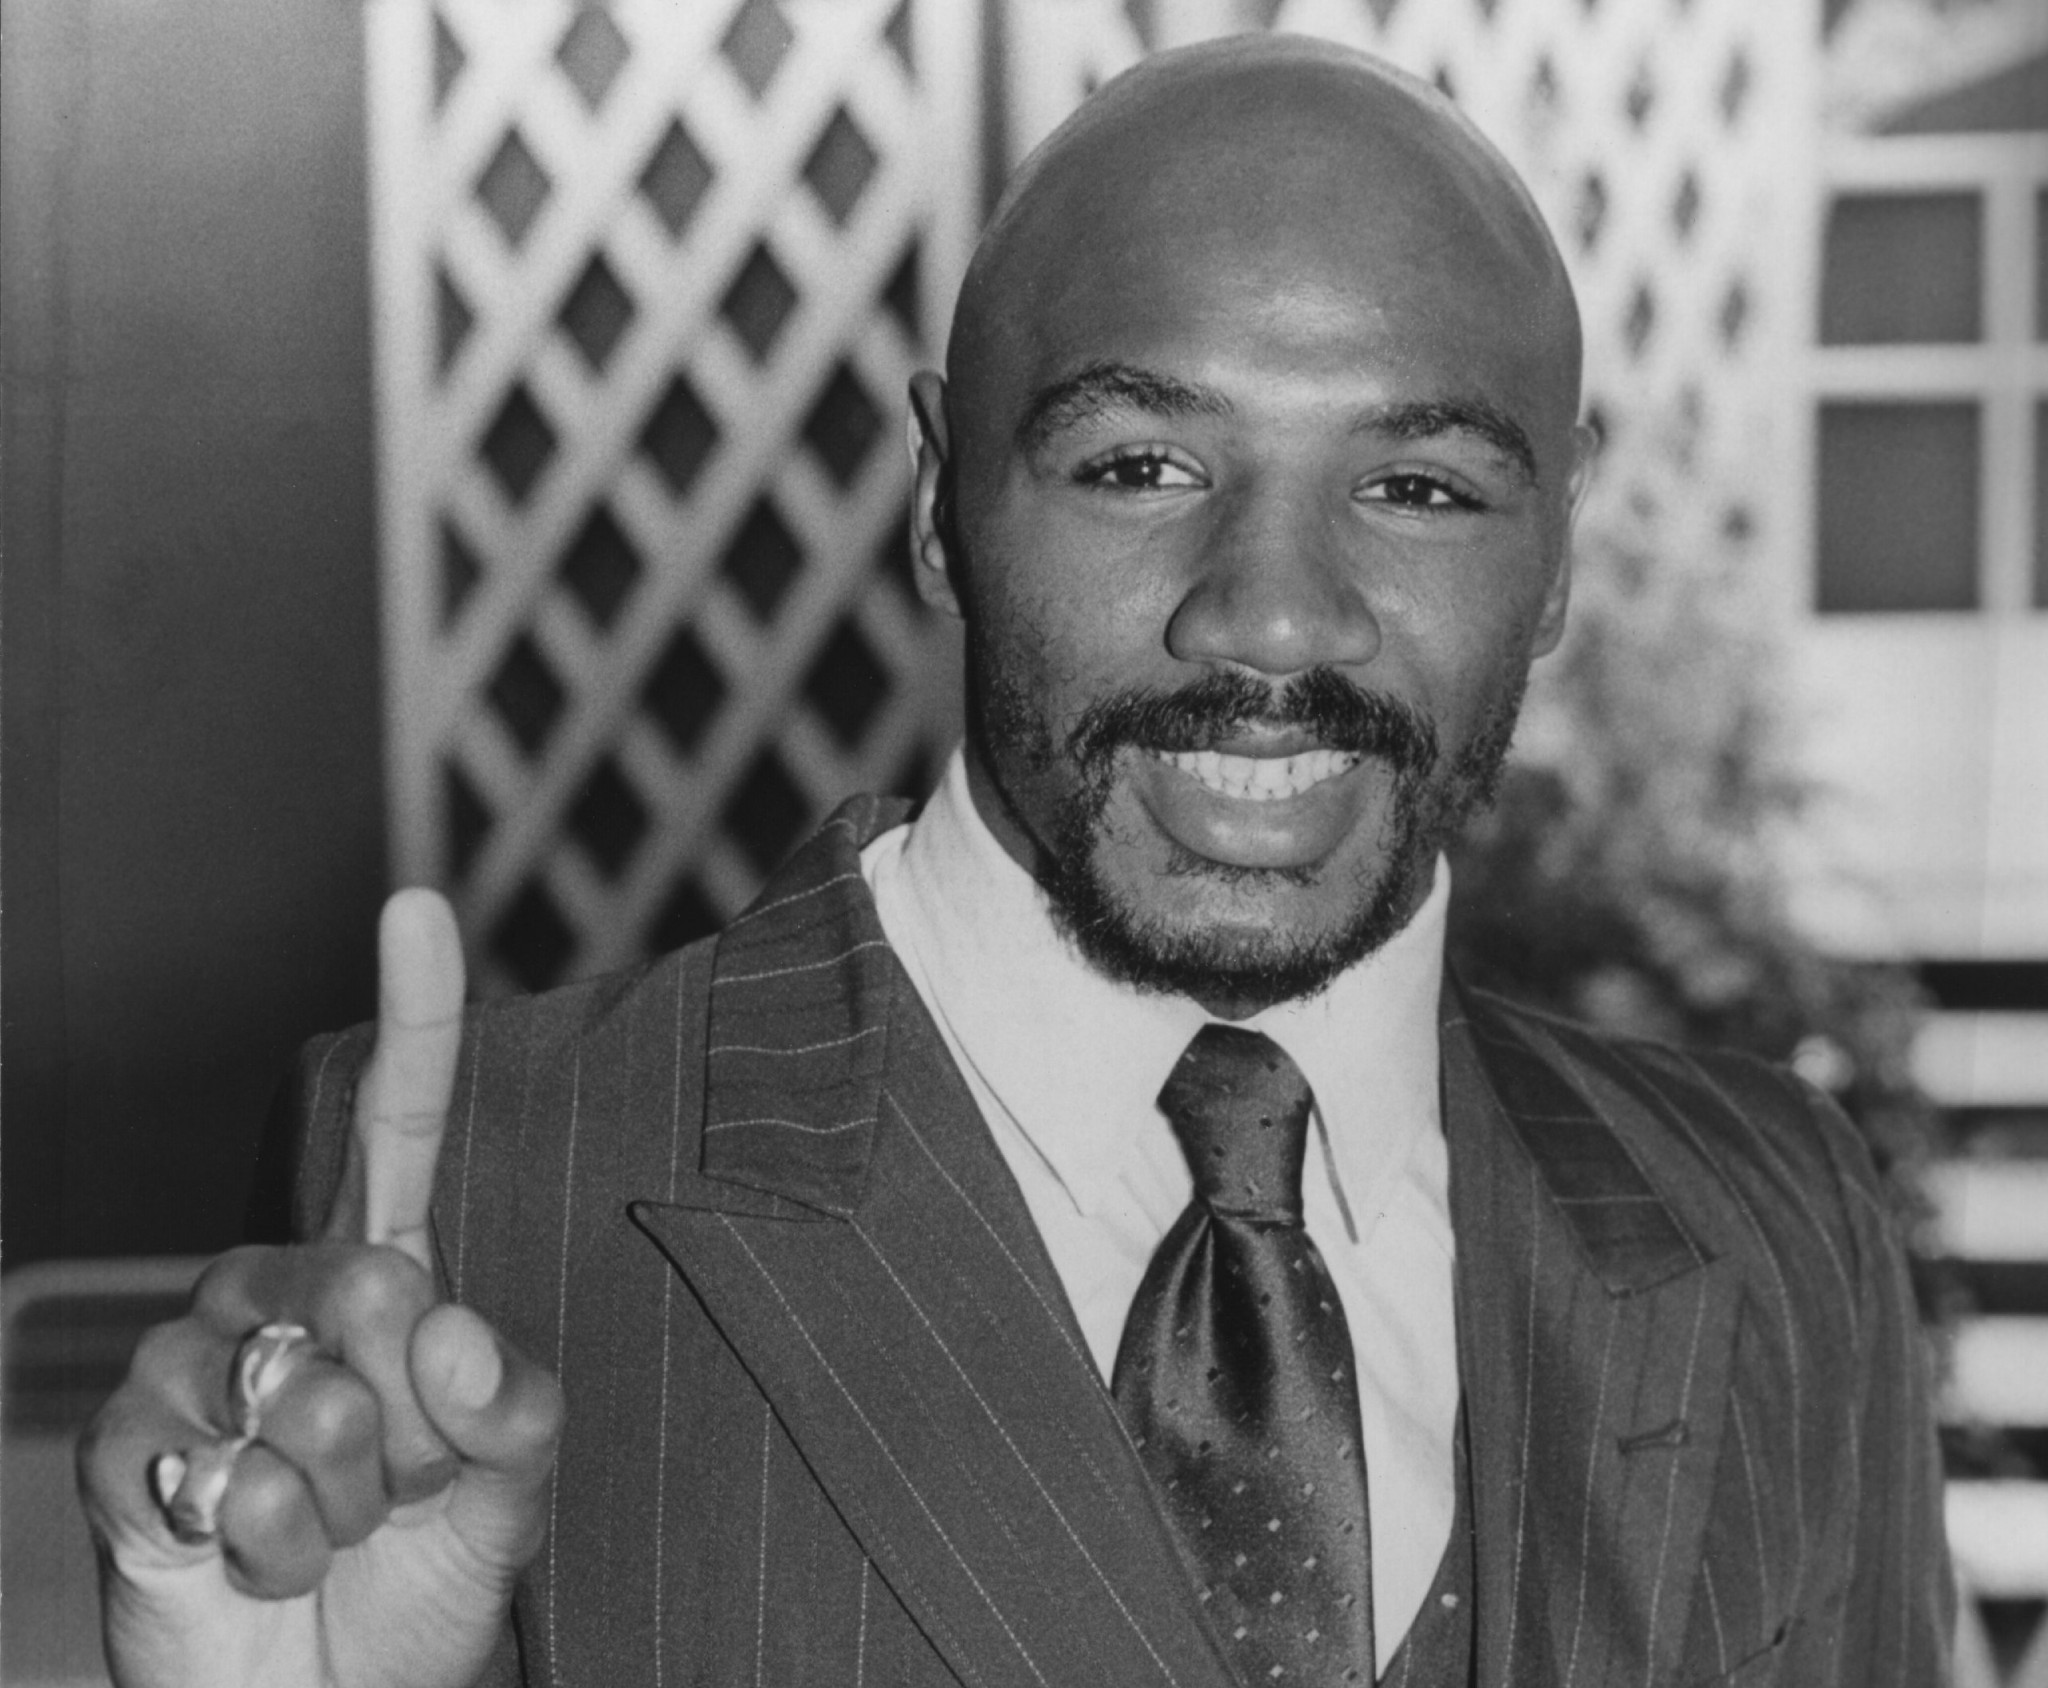 Marvelous Marvin Hagler, one of the greatest boxers of all time, has died aged 66 ©Getty Images